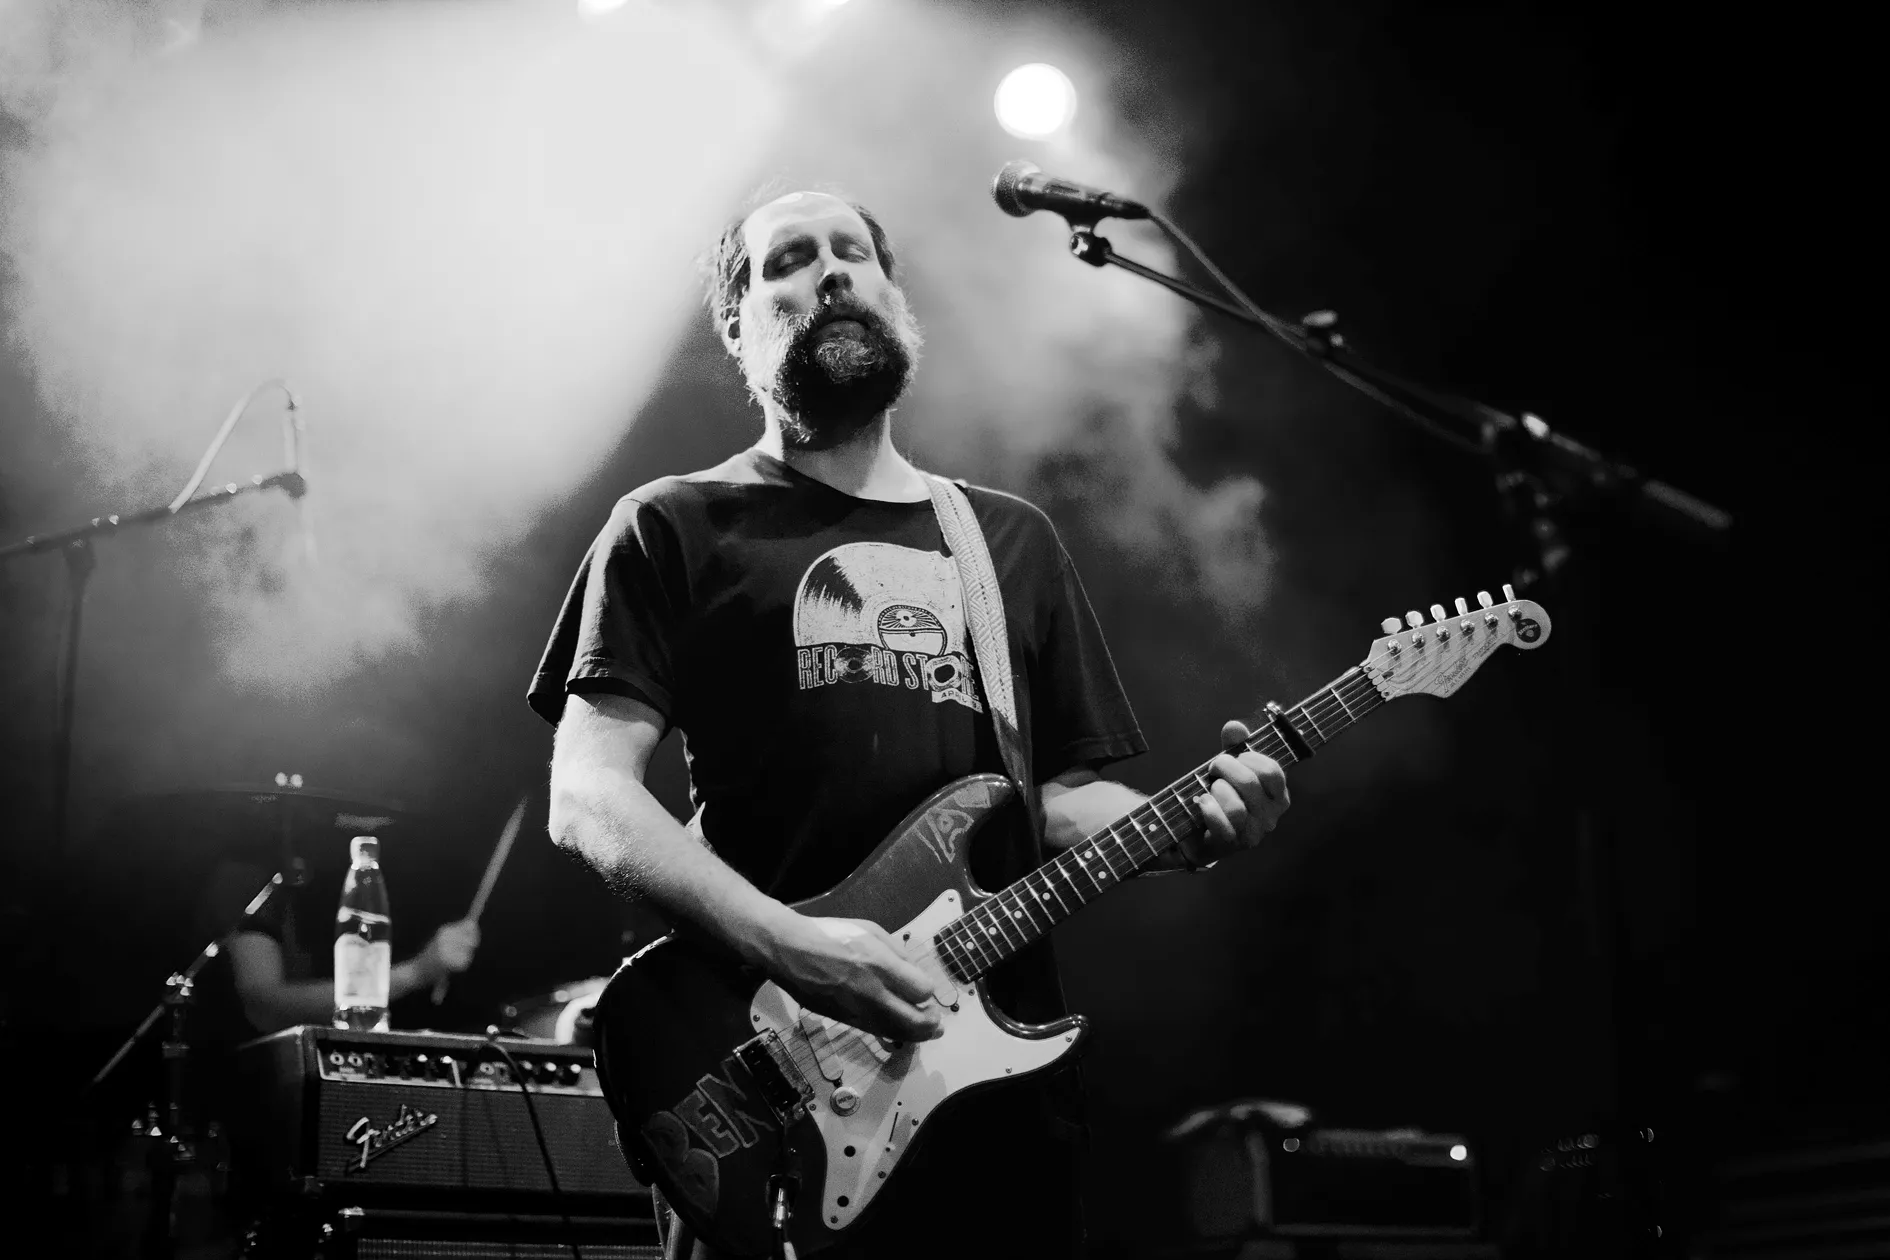 Built to Spill indtager Danmark